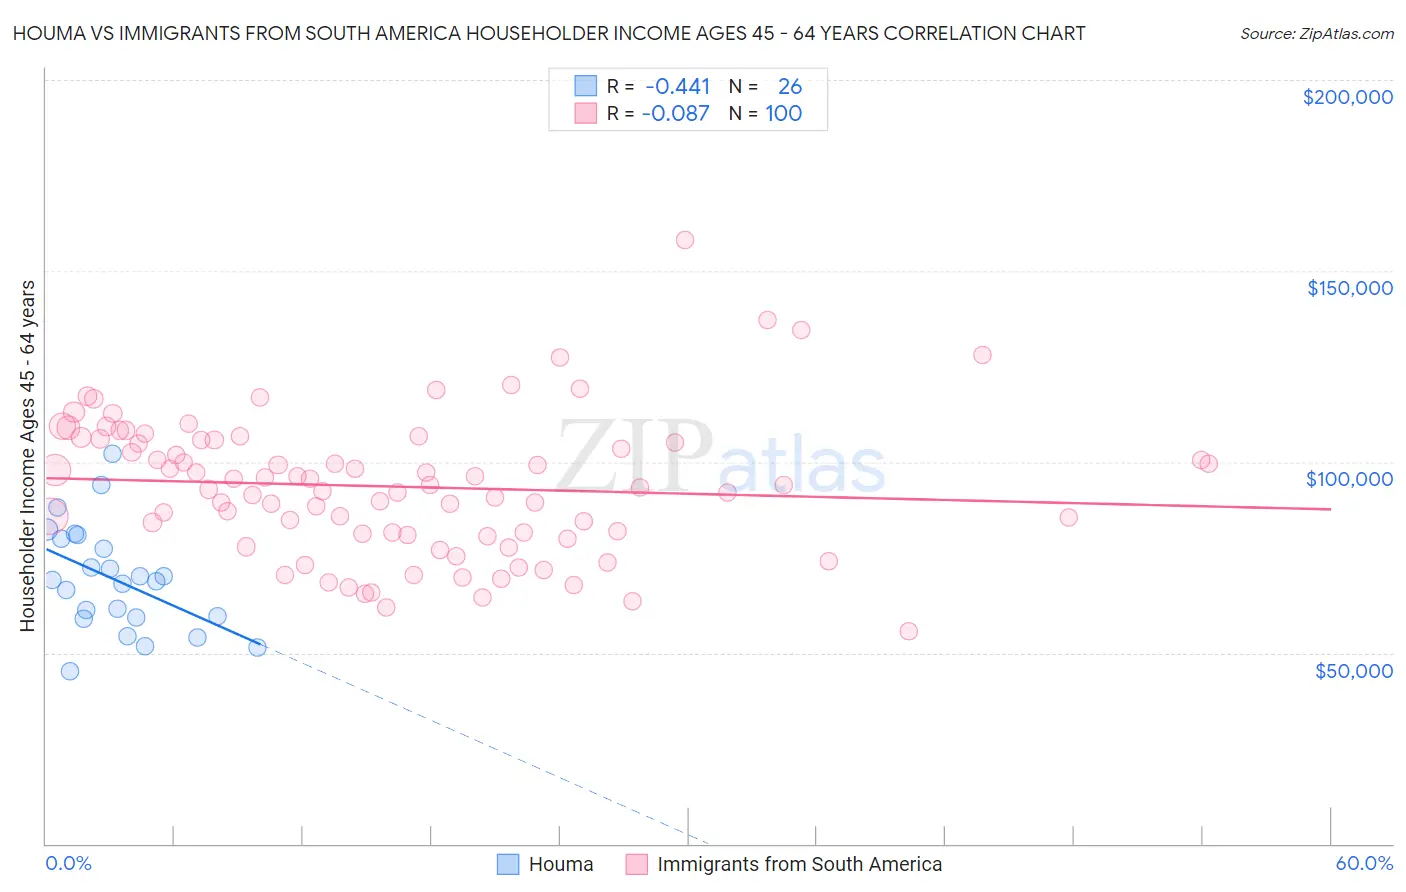 Houma vs Immigrants from South America Householder Income Ages 45 - 64 years